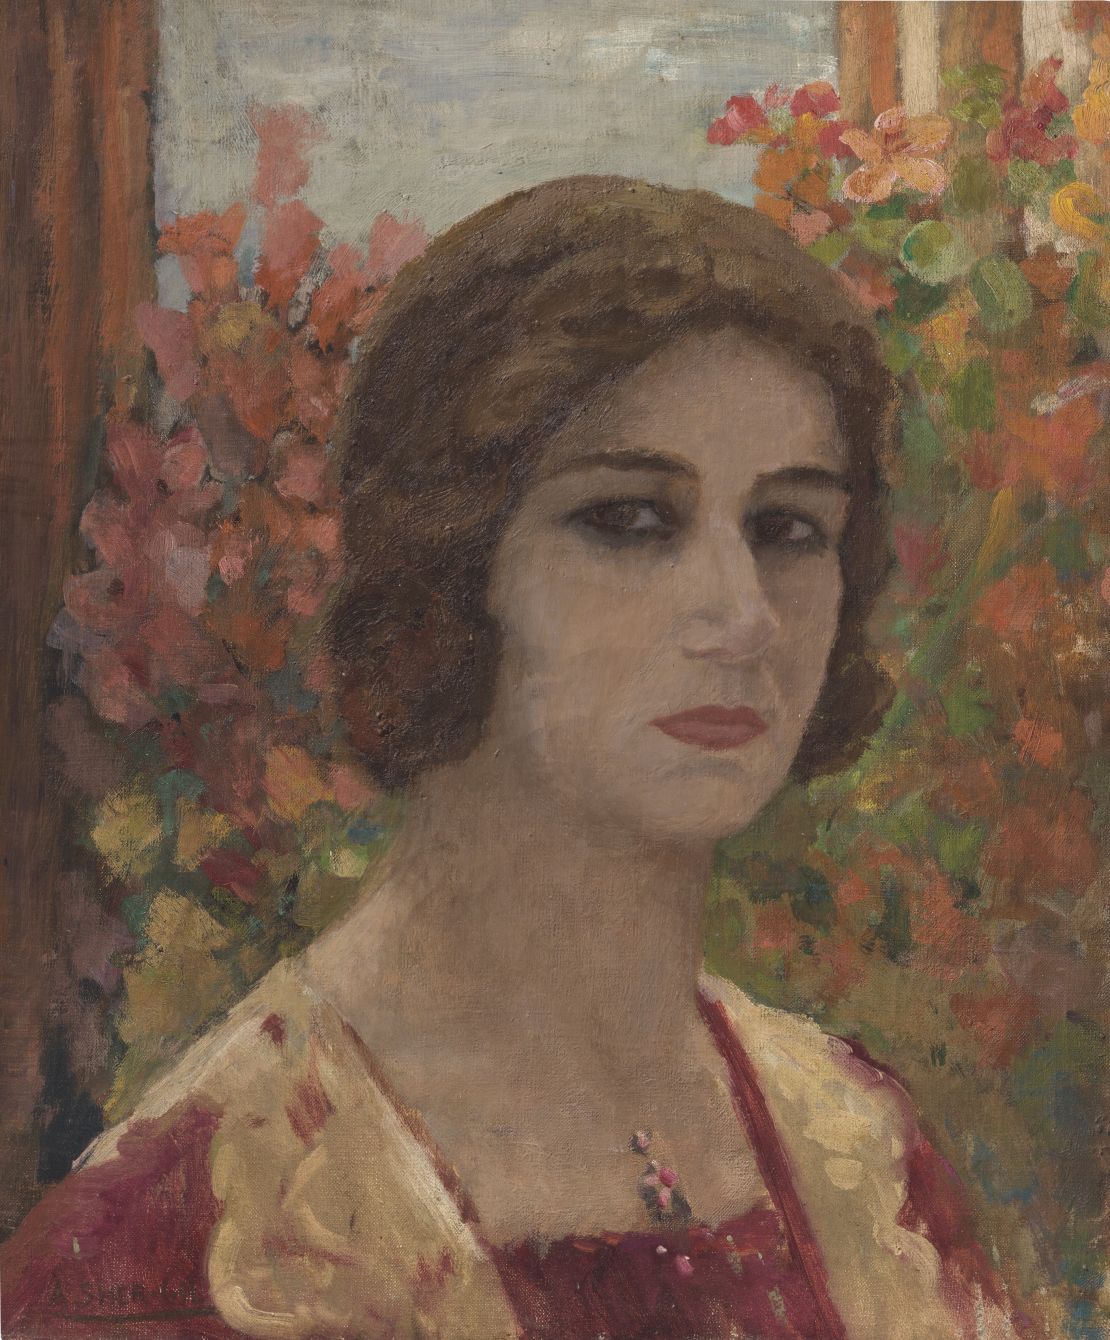 "Portrait of Denyse" depicts Amrita Sher-Gil's friend, the art critic Denyse Proutaux.